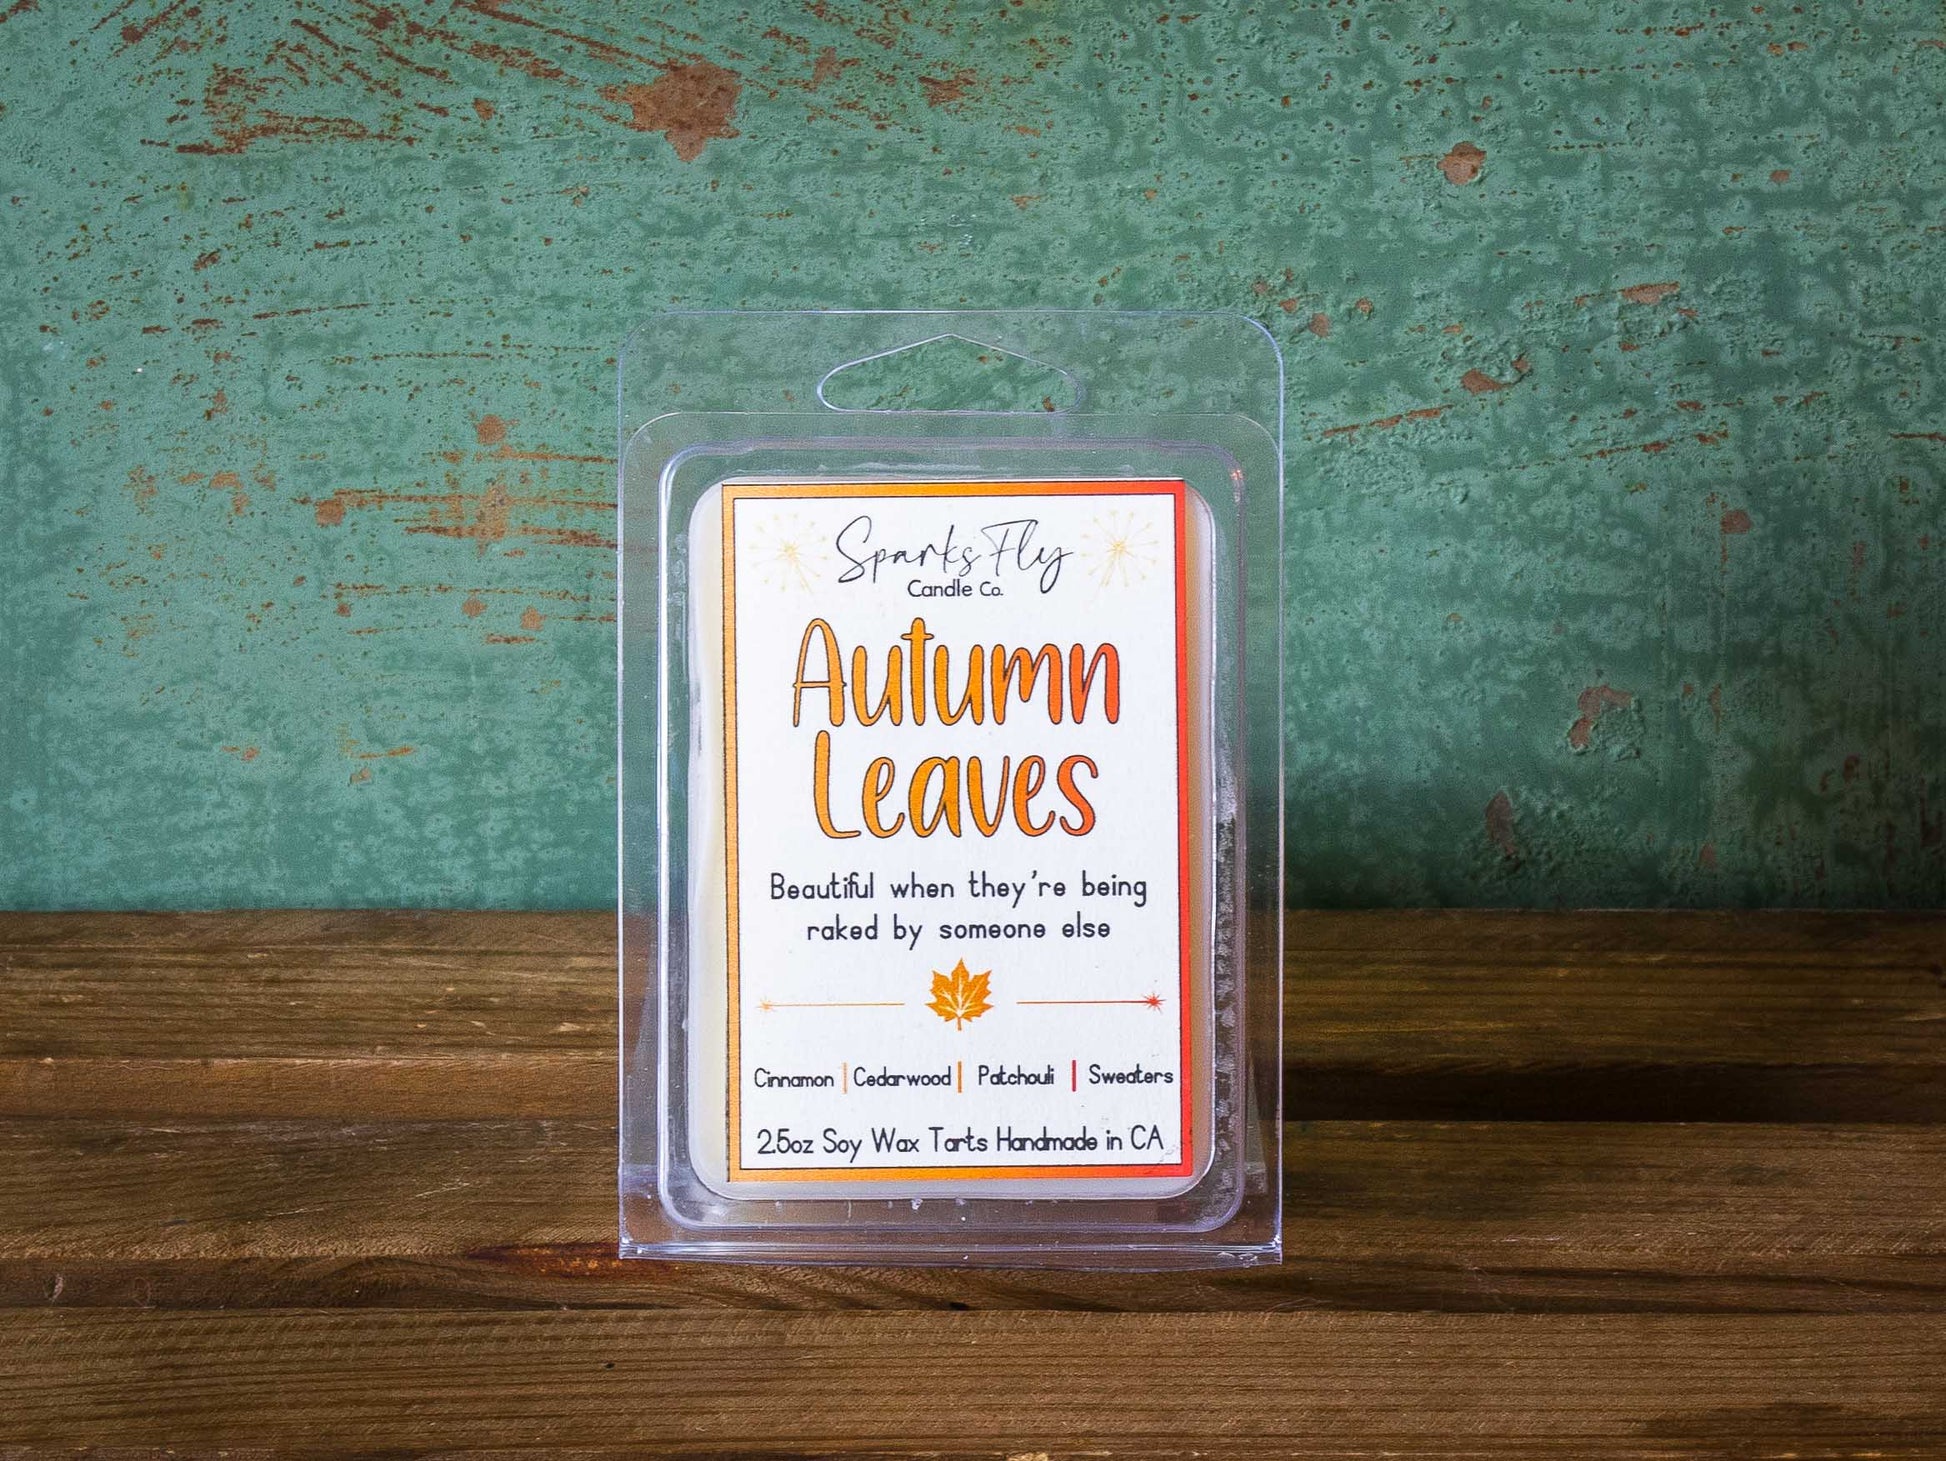 Autumn Leaves sassy candle; celebrates the beauty of fall foliage best enjoyed when raked by others, satire